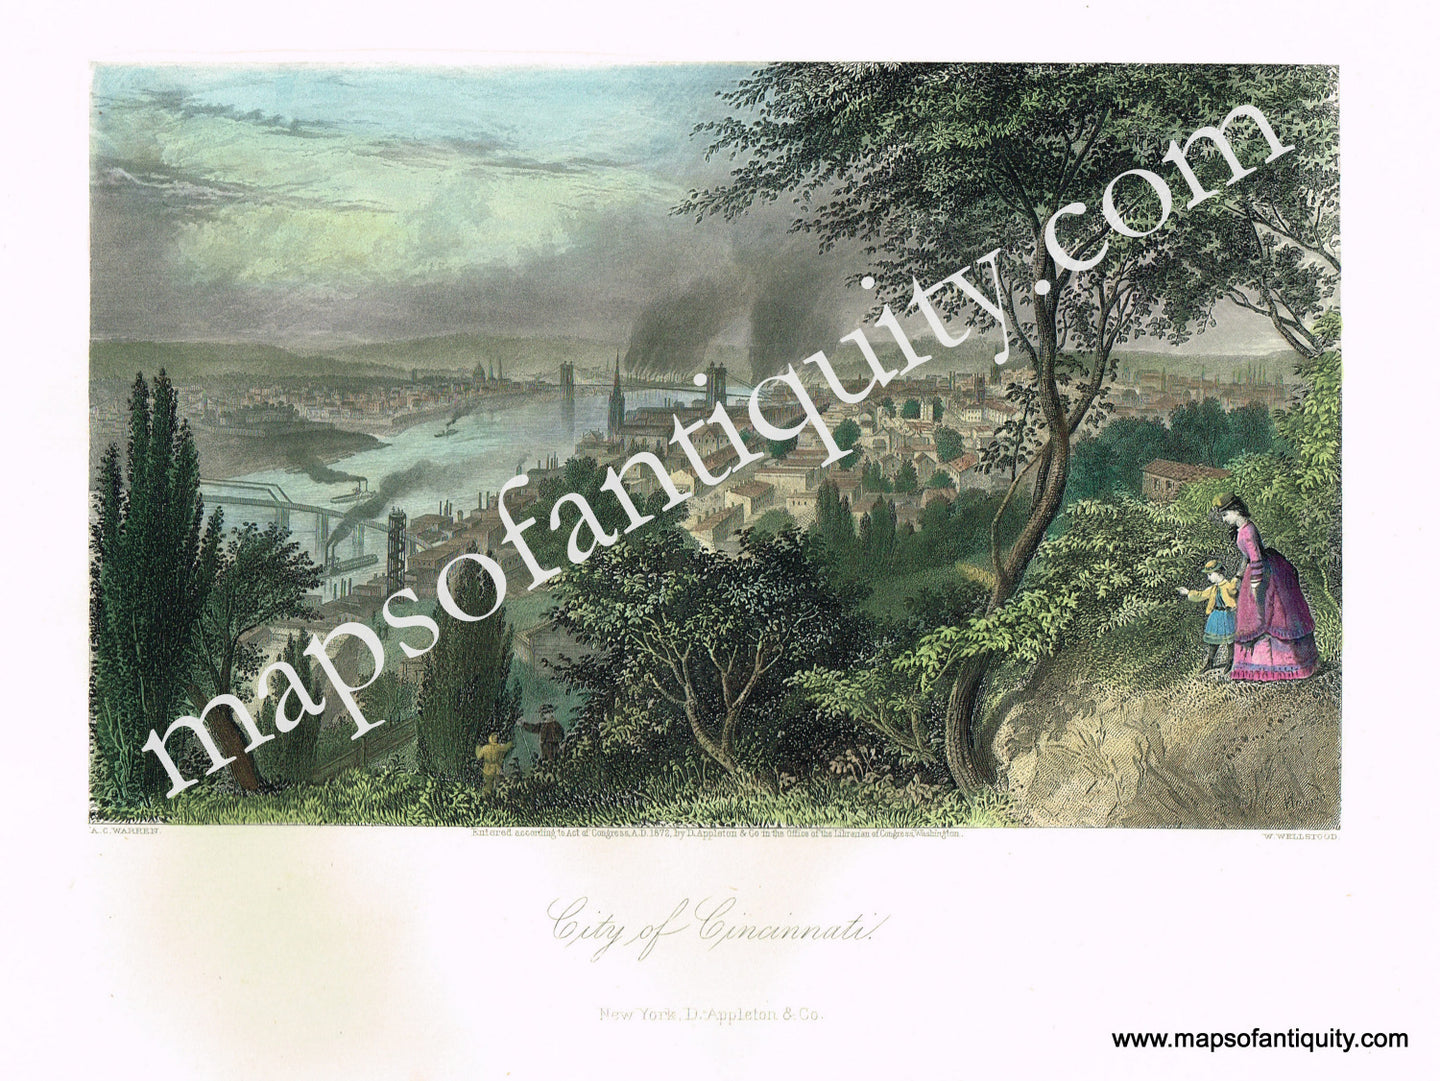 Hand-Colored-Antique-Engraved-Illustration-City-of-Cincinnati-Towns-and-Cities---1872-Appleton-Maps-Of-Antiquity